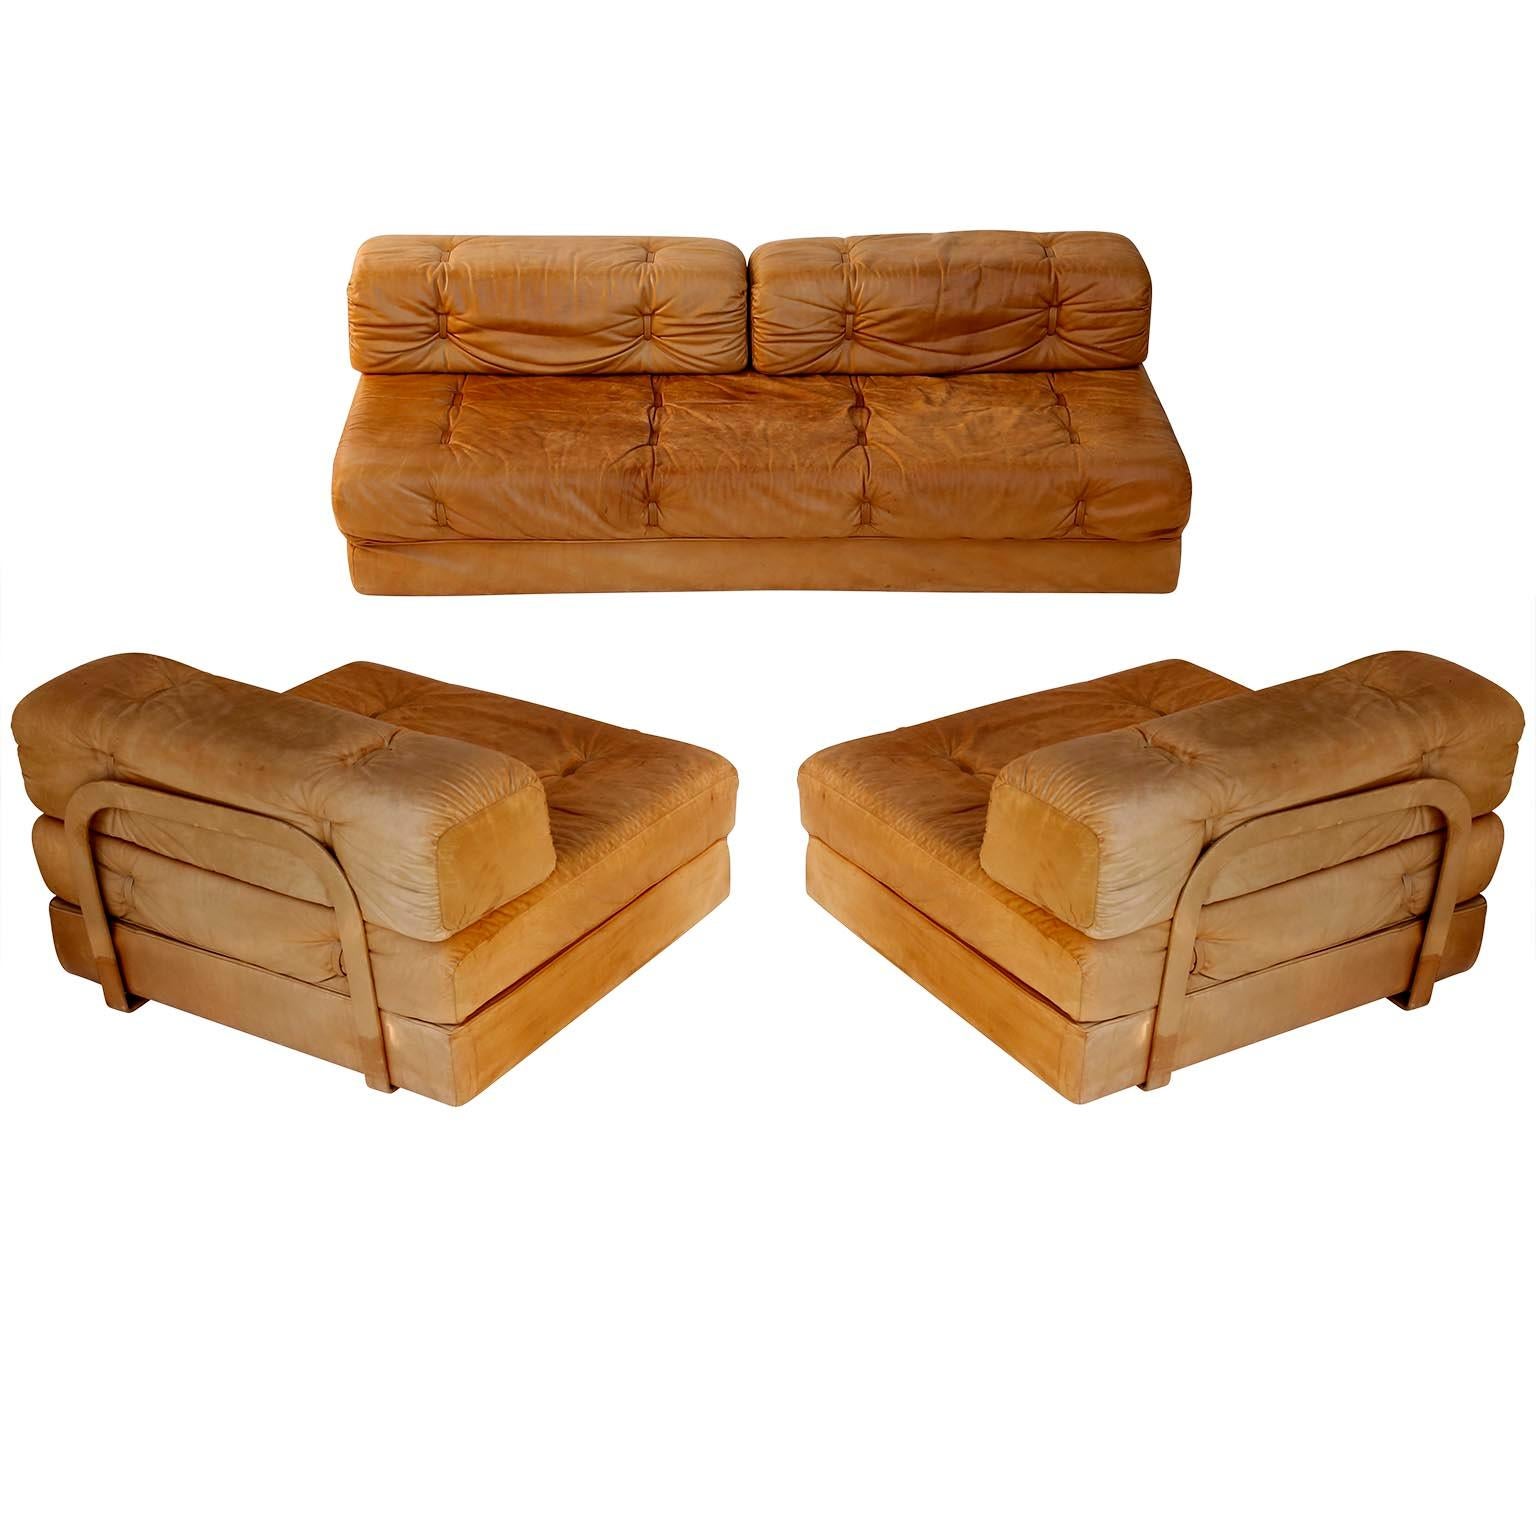 Pair of Chairs Convertable Bed Daybed Sofa 'Atrium', Wittmann, Cognac Leather 6